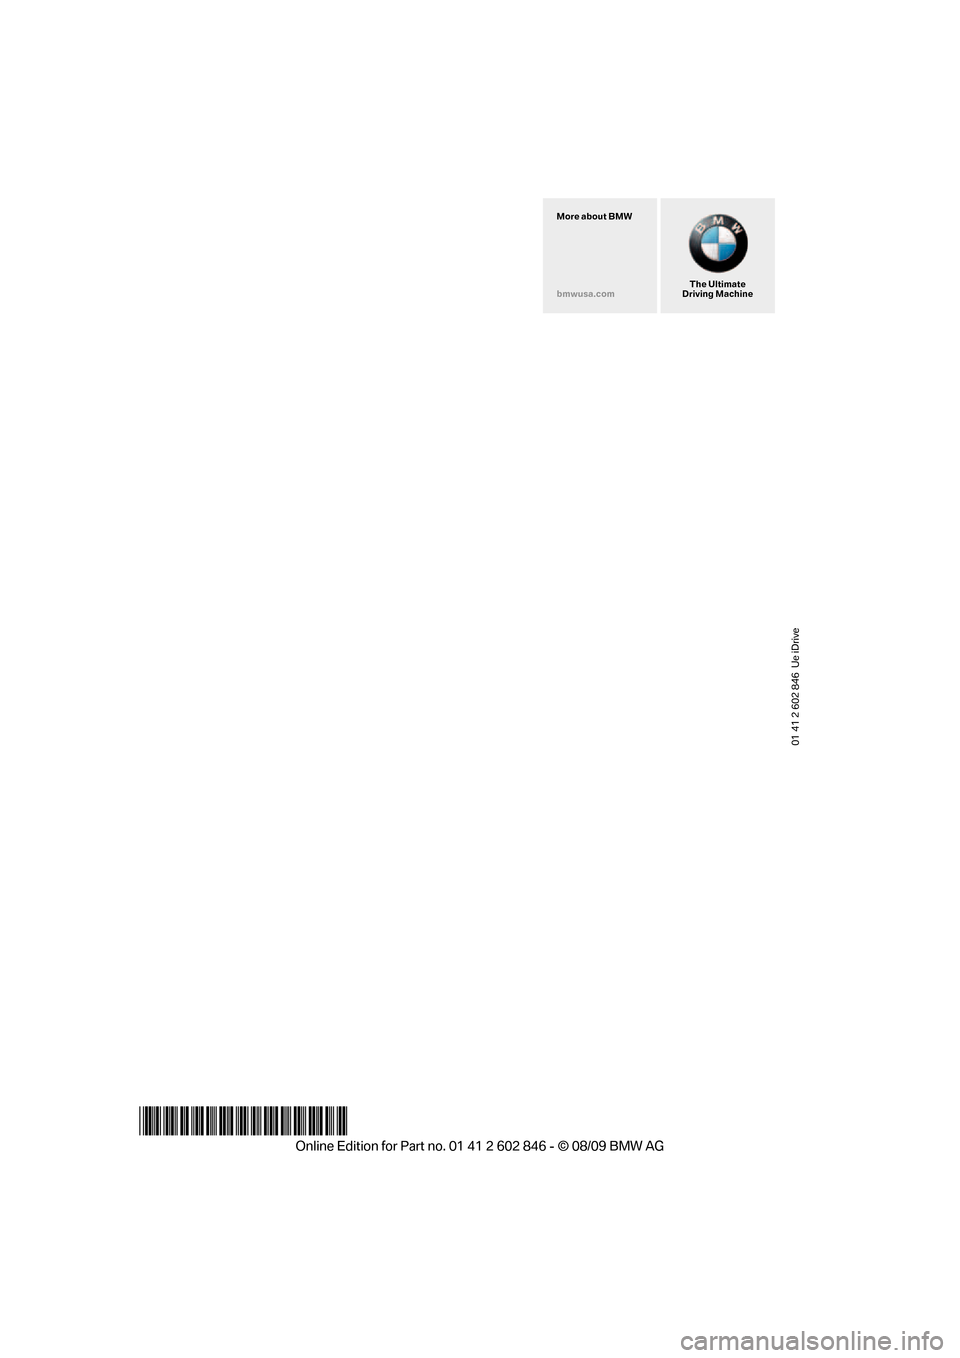 BMW 128I 2010 E81 Owners Manual 01 41 2 602 846  Ue iDrive
*BL2602846006*
The Ultimate
Driving Machine More about BMW
bmwusa.com 